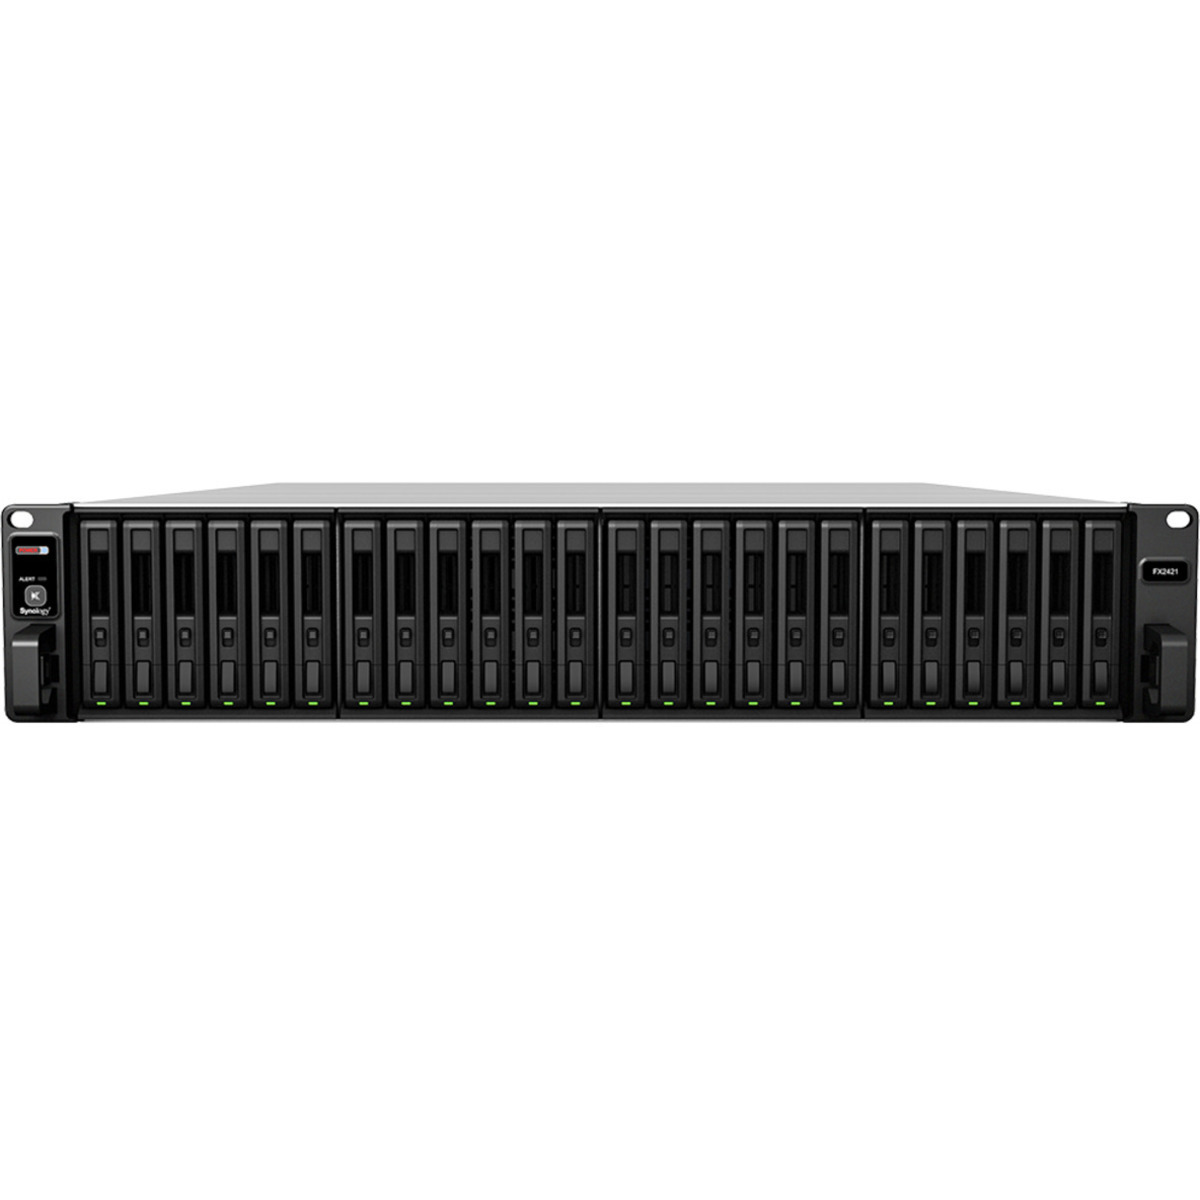 Synology FX2421 External Expansion Drive 11.5tb 24-Bay RackMount Large Business / Enterprise Expansion Enclosure 23x500gb Sandisk Ultra 3D SDSSDH3-500G 2.5 560/520MB/s SATA 6Gb/s SSD CONSUMER Class Drives Installed - Burn-In Tested FX2421 External Expansion Drive